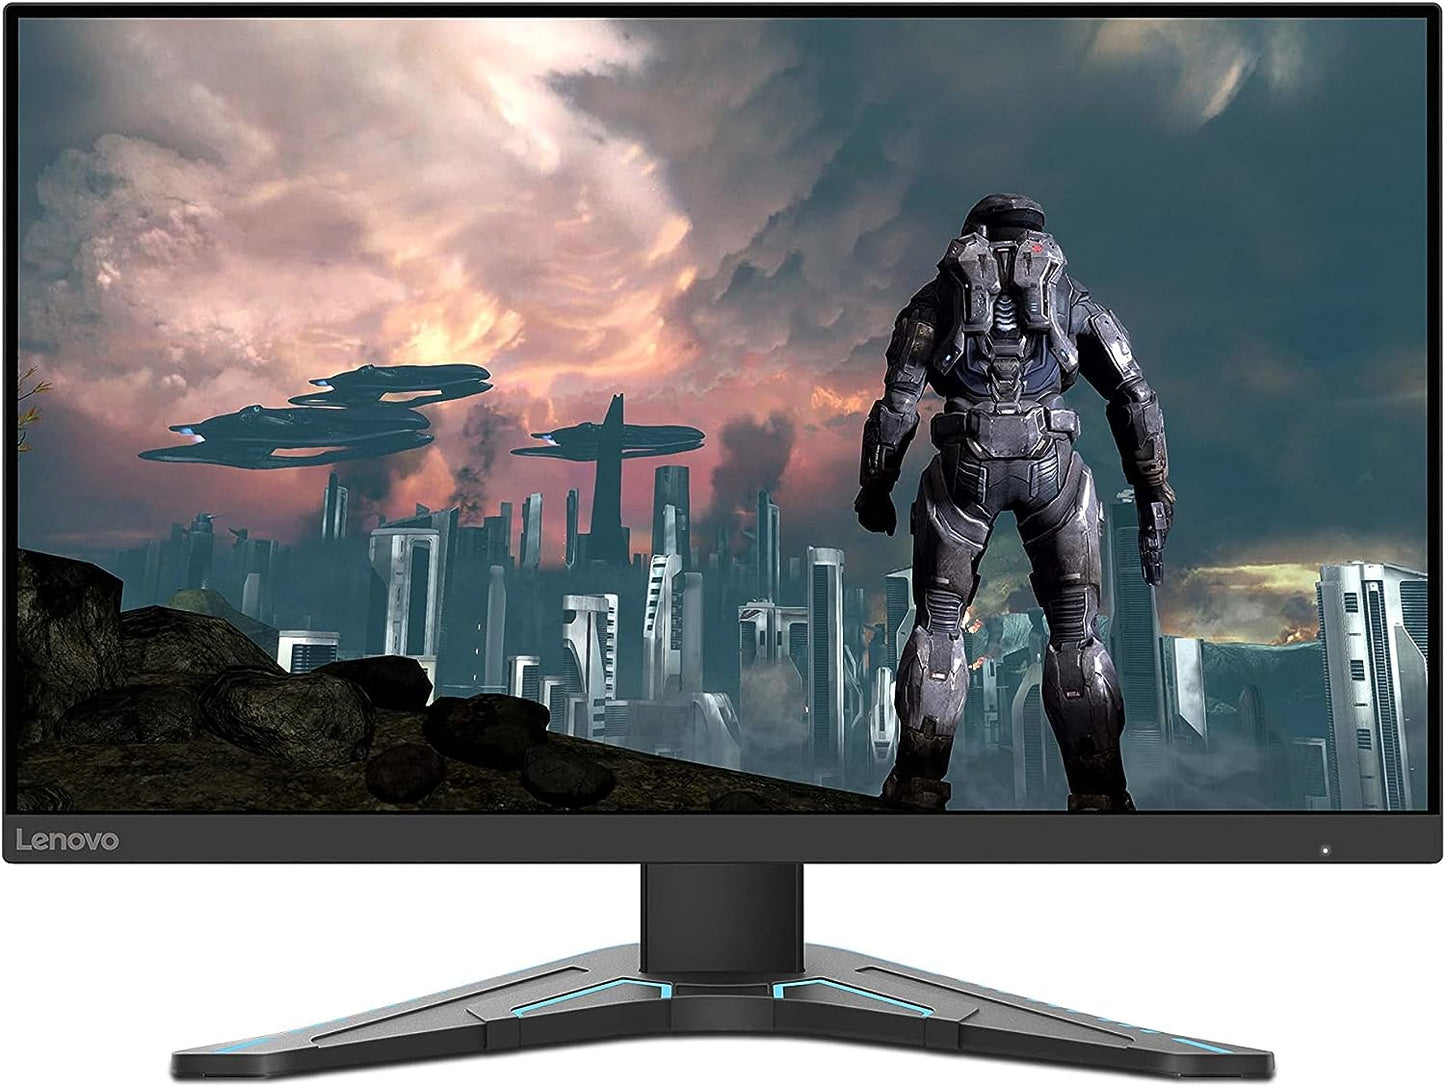 Lenovo G24-20 IPS 144 Hz (Overclock to 165Hz) FHD 0.5MS (MPRT) 350 nits Gaming Monitor Blue Light Certified - Tilt/Height Adjustable Stand - HDMI x2 & DP Port